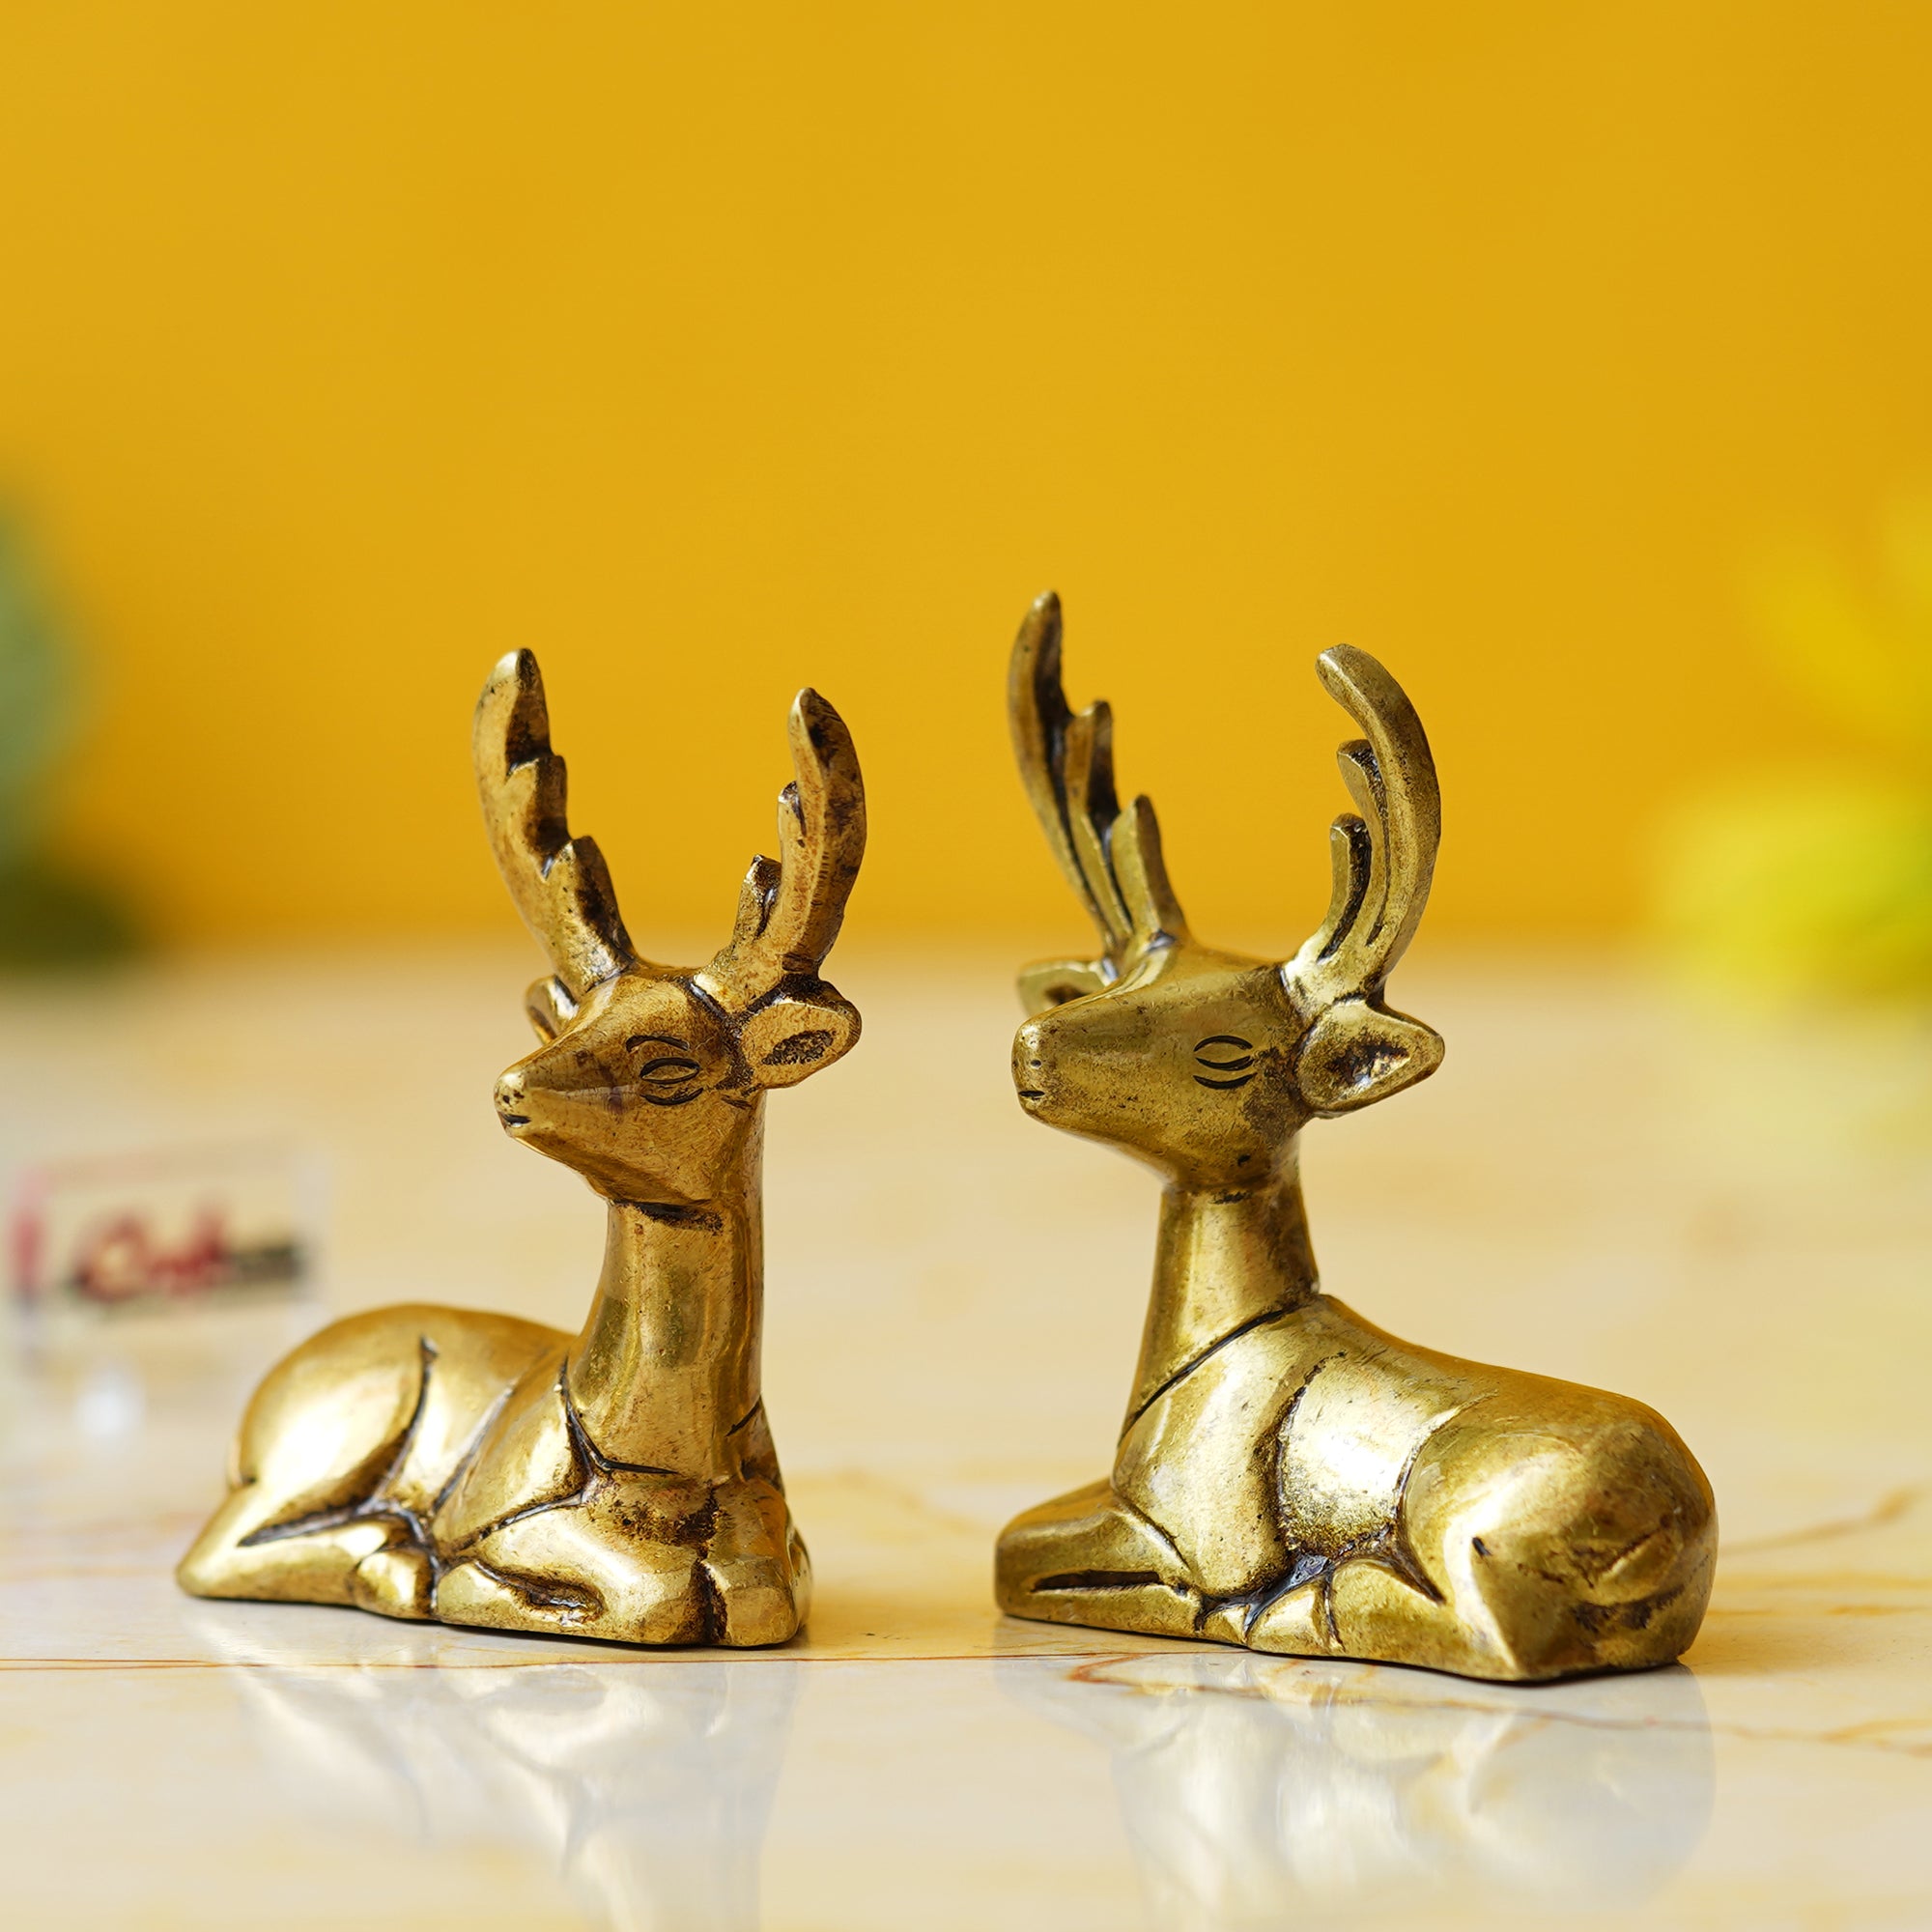 Set of 2 Golden Brass Deer Statues Showpieces - Animal Figurines for Home Decoration - Gift for Christmas, Winter Festivities, and Holiday Celebrations 5